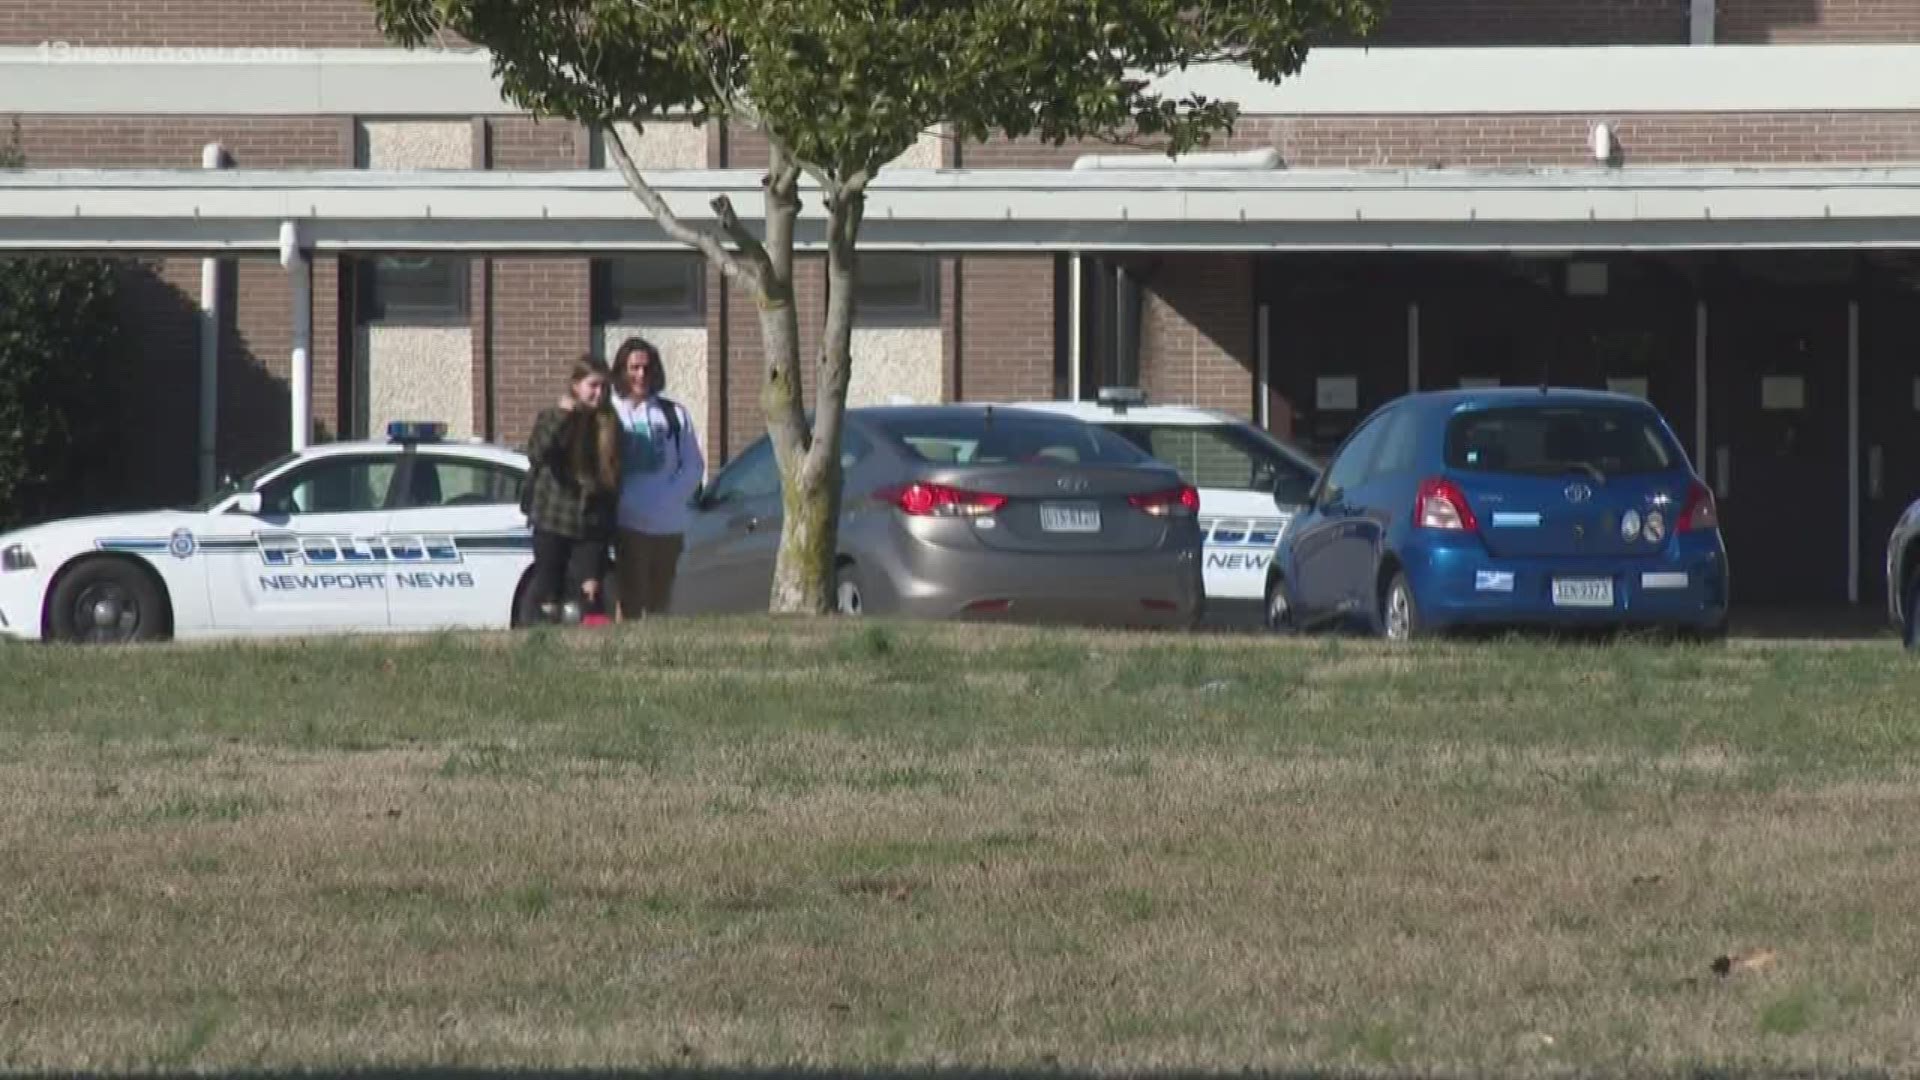 13News Now Allison Bazzle spoke to students and parents about the threat that prompted extra police presence at Menchville High School.